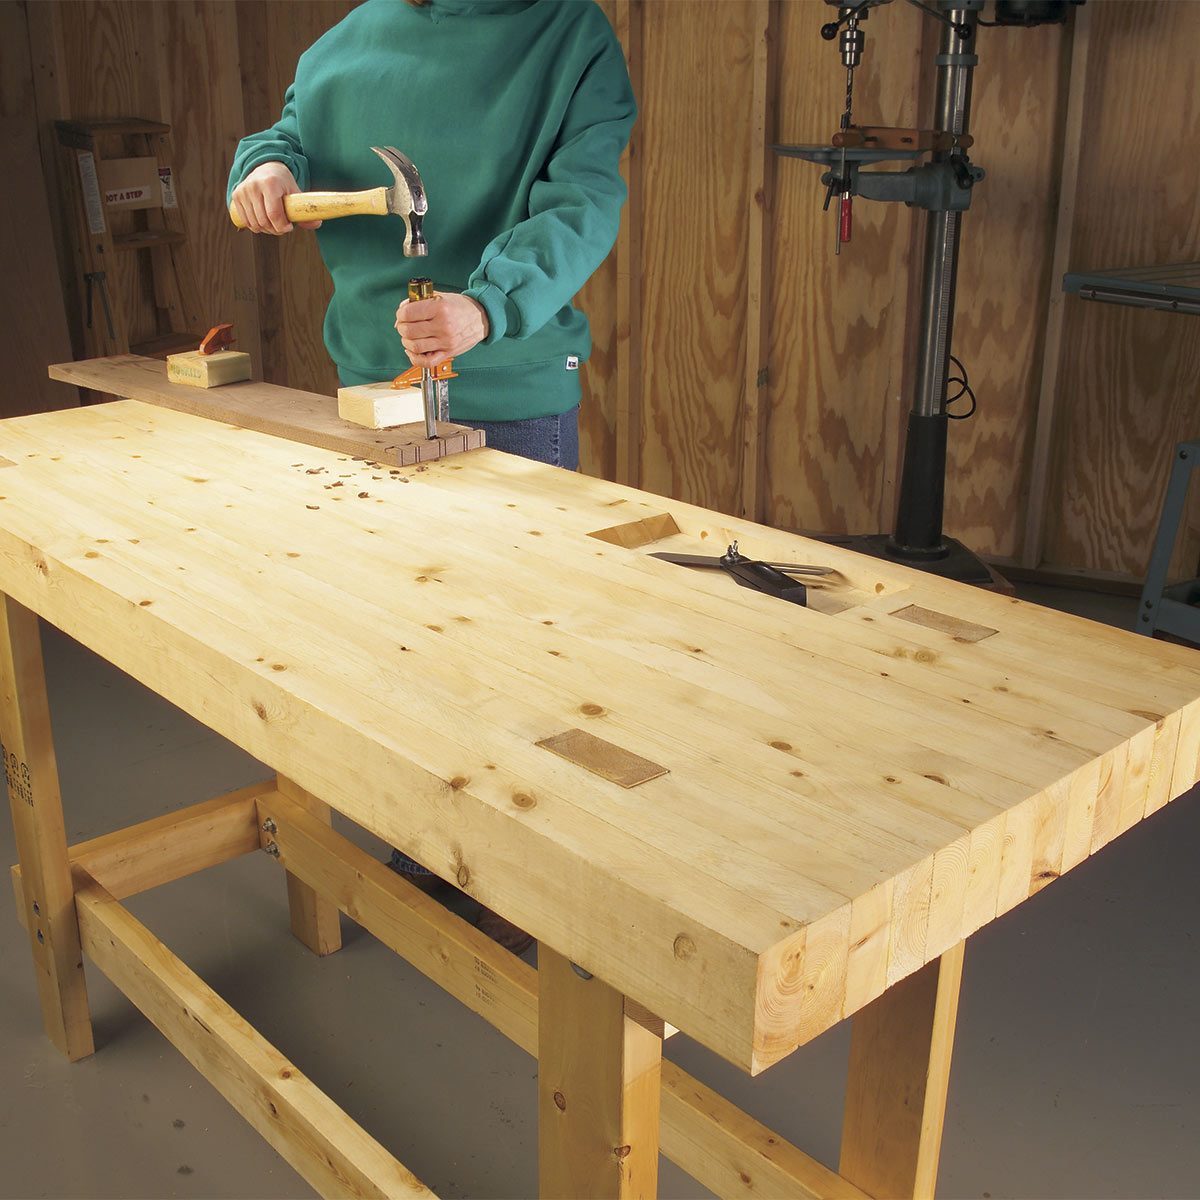 Basic woodworking bench plans free